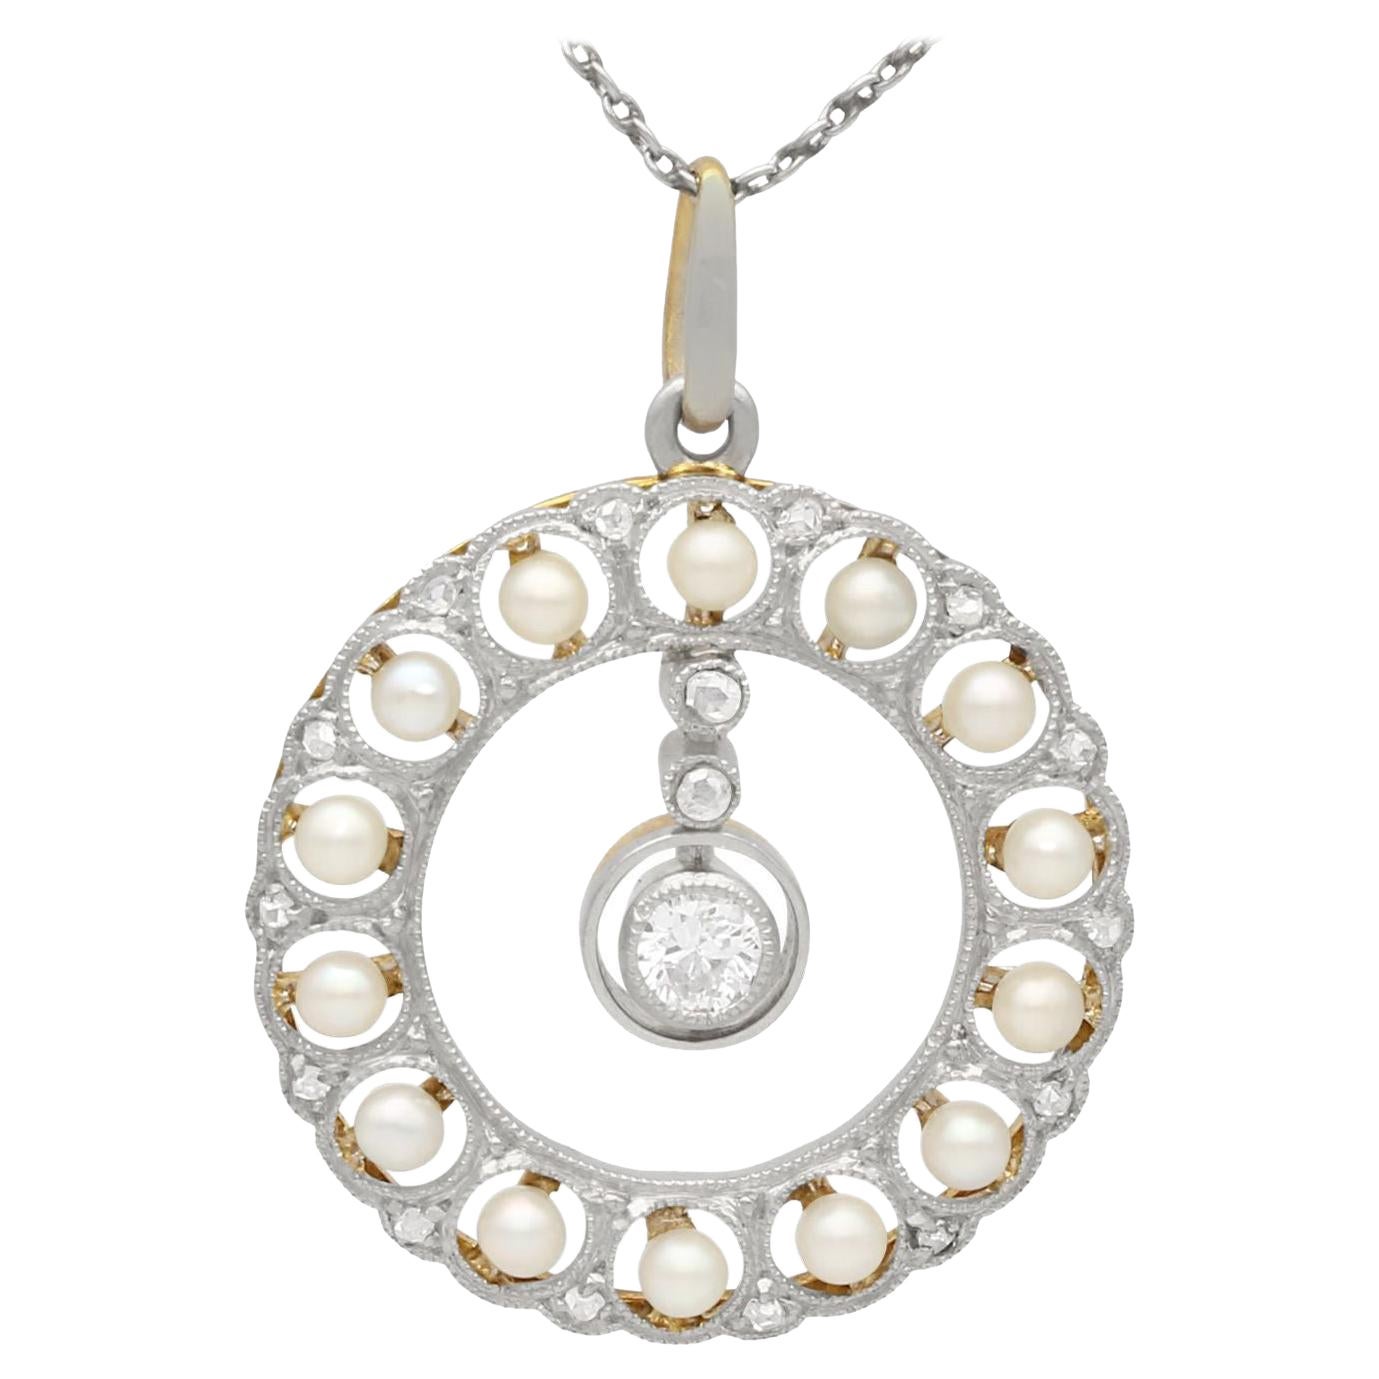 Antique Diamond and Seed Pearl Yellow Gold Pendant, circa 1900